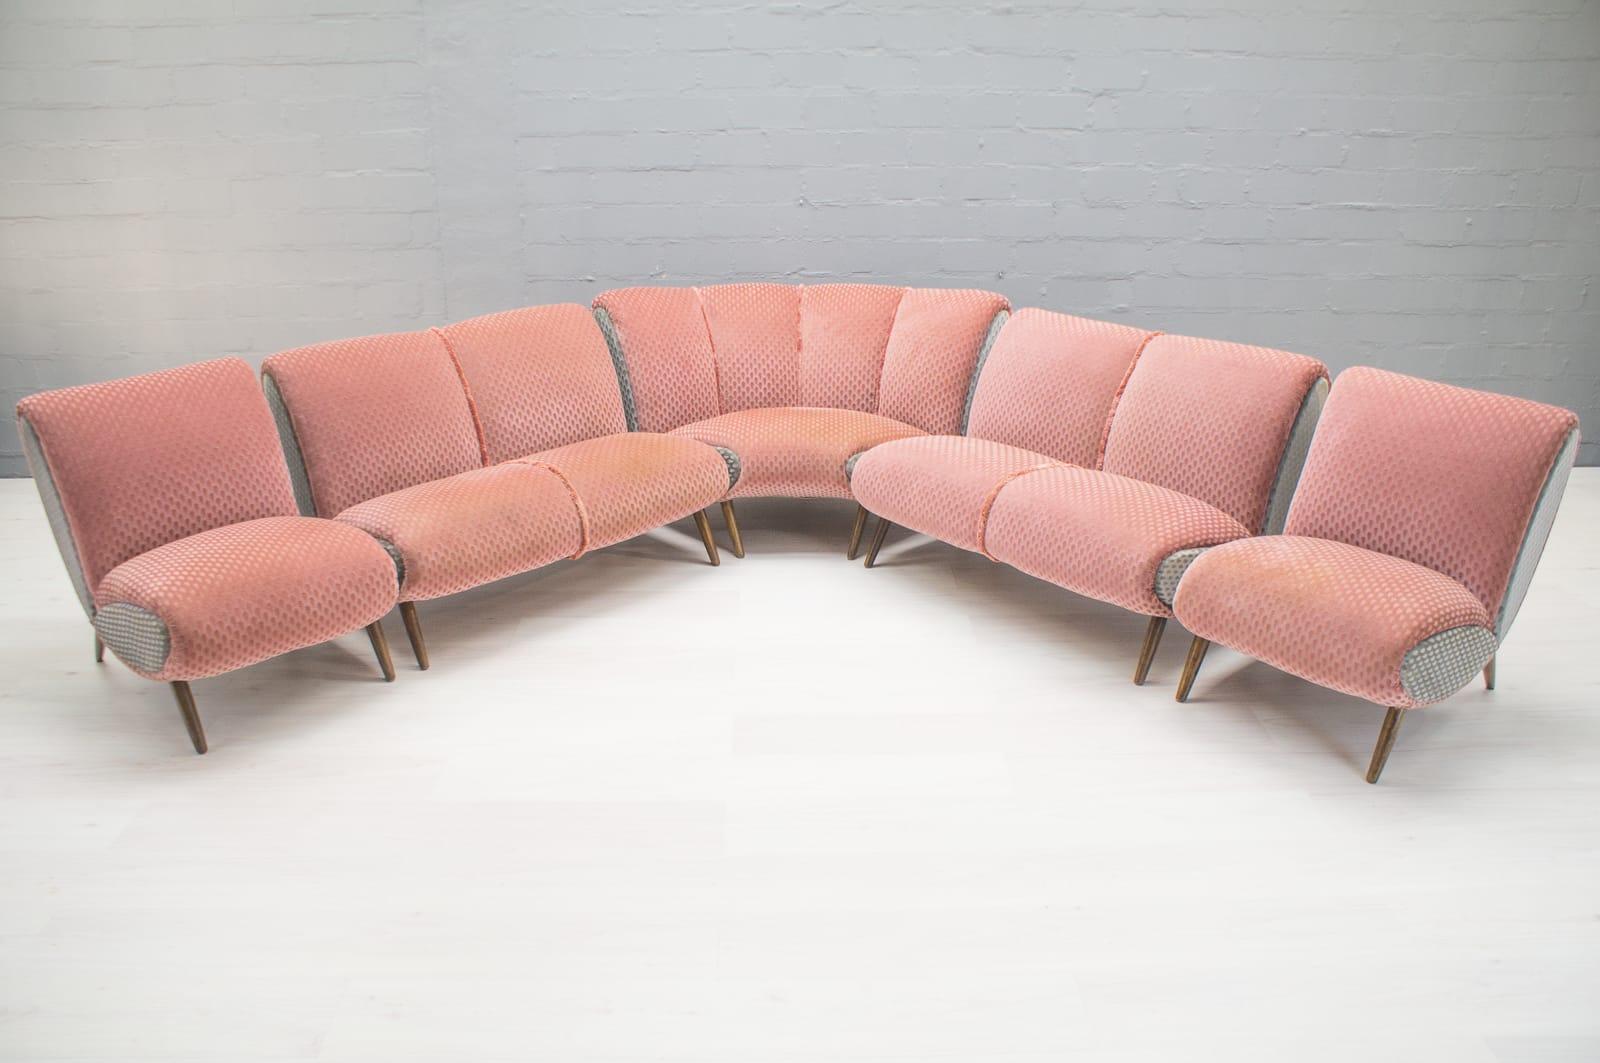 Central American Extremely rare huge sofa set by Norman Bel Geddes from the 1950s, USA